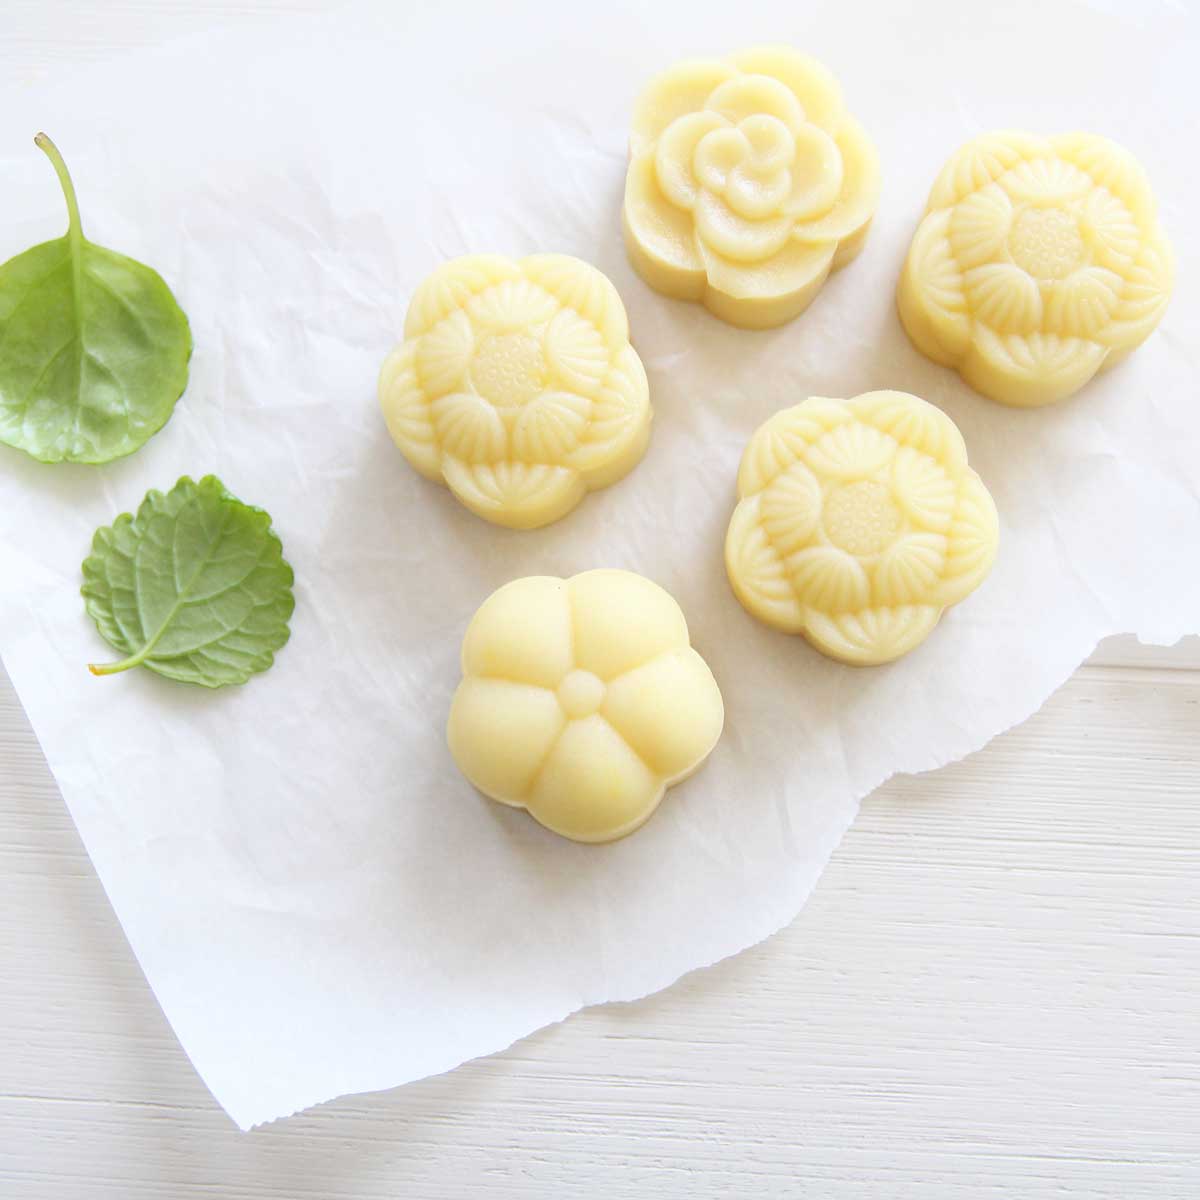 Homemade Durian Snow Skin Mooncakes with Mung Bean Filling - Vegan Chocolate Whipped Cream